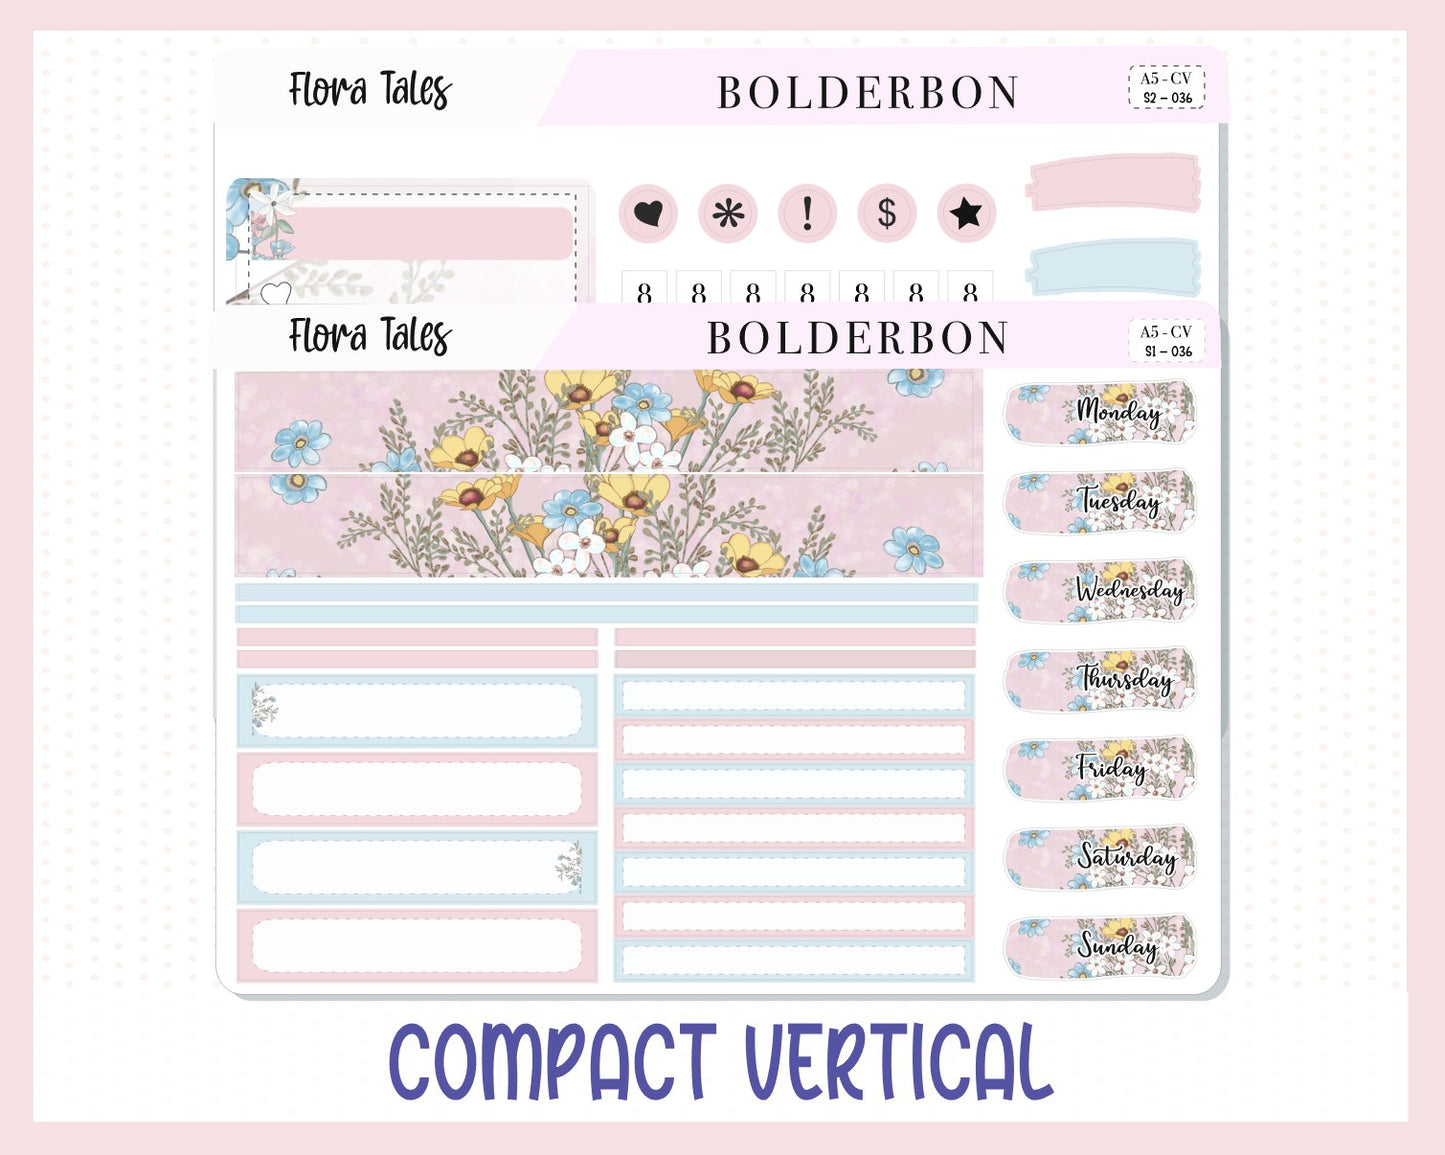 FLORA TALES "Compact Vertical" || A5 Planner Sticker Kit, Bookish, Book Stickers